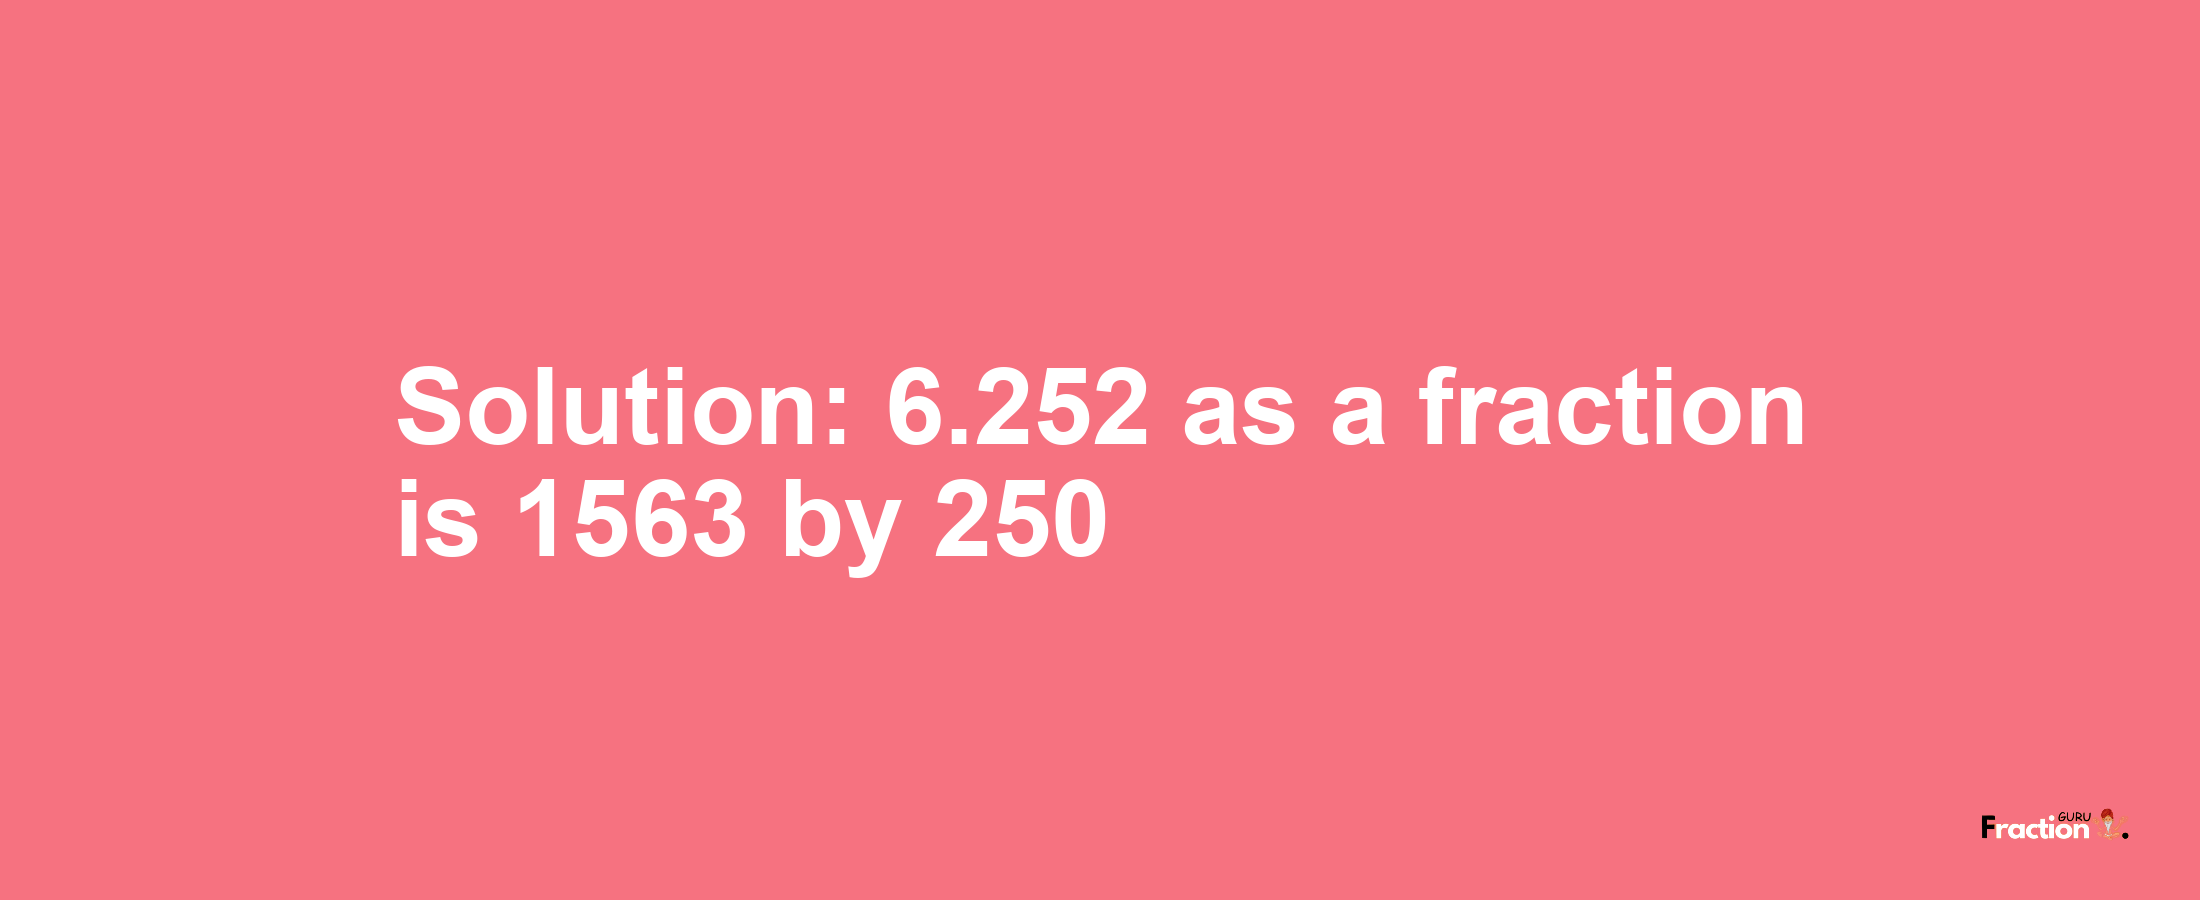 Solution:6.252 as a fraction is 1563/250